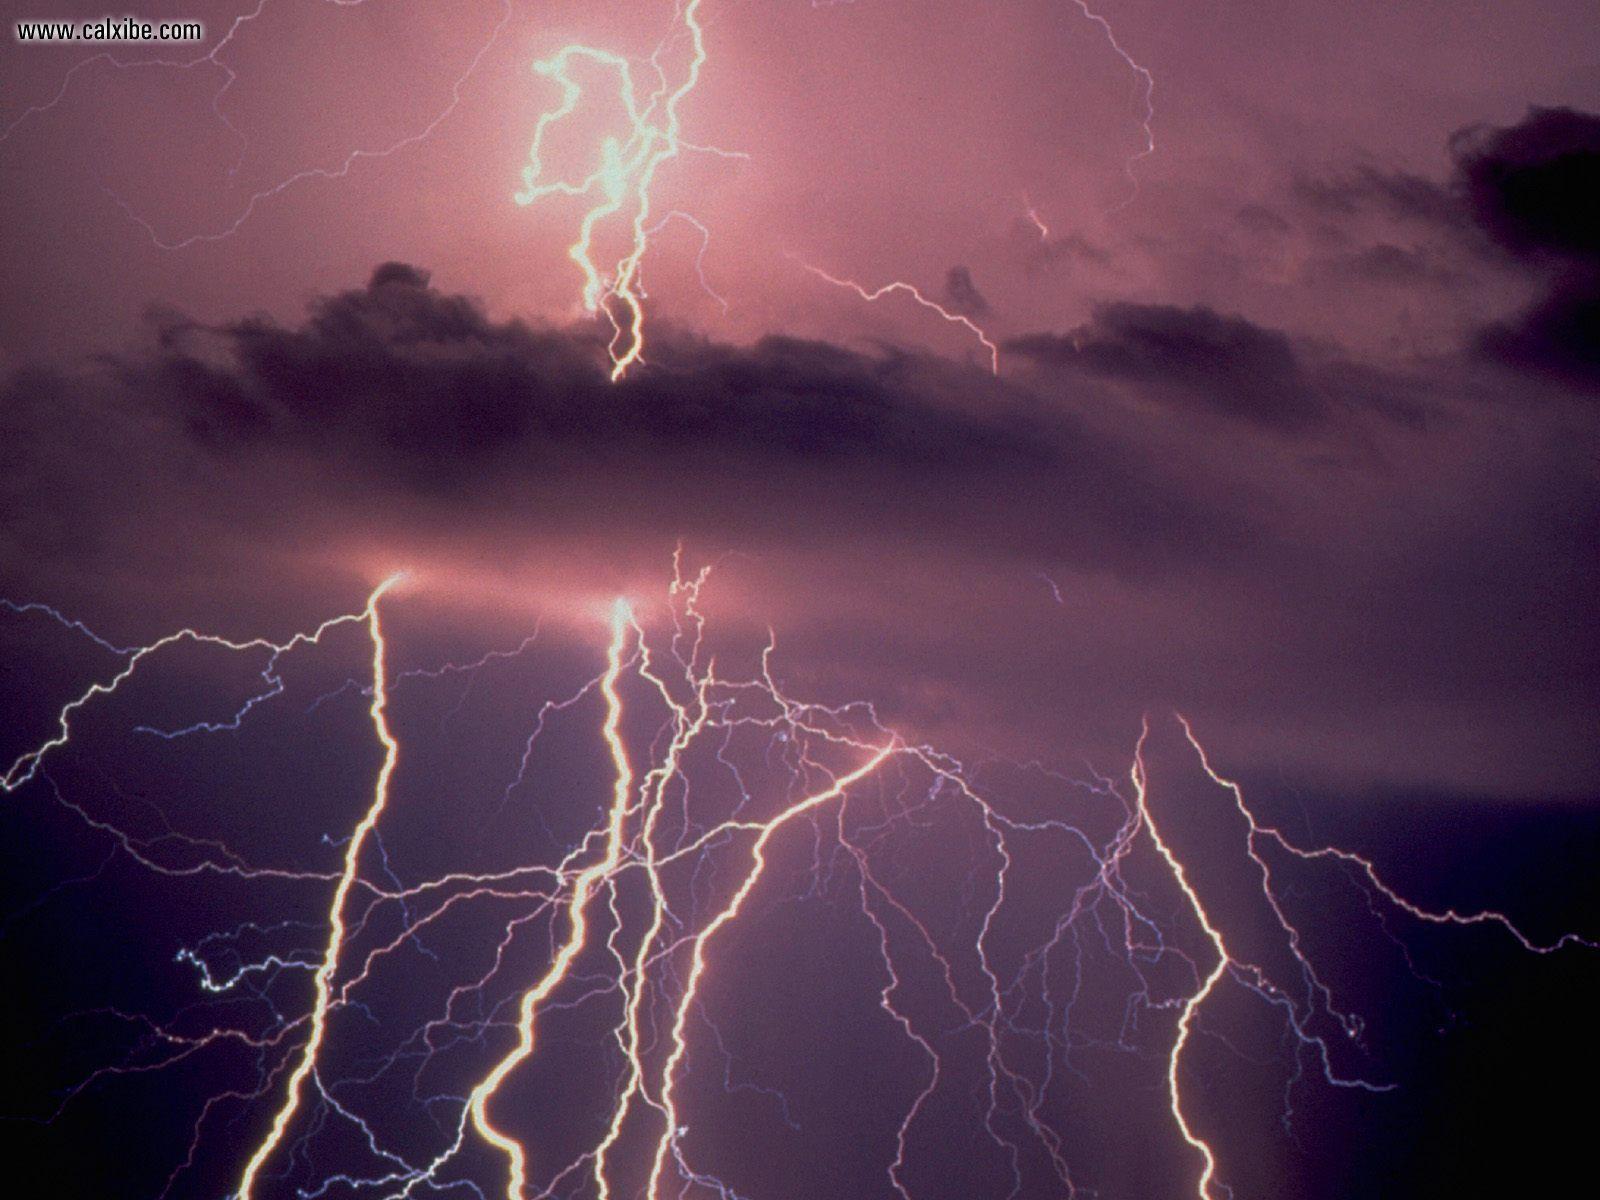 Nature: Thunderbolt, picture nr. 17840